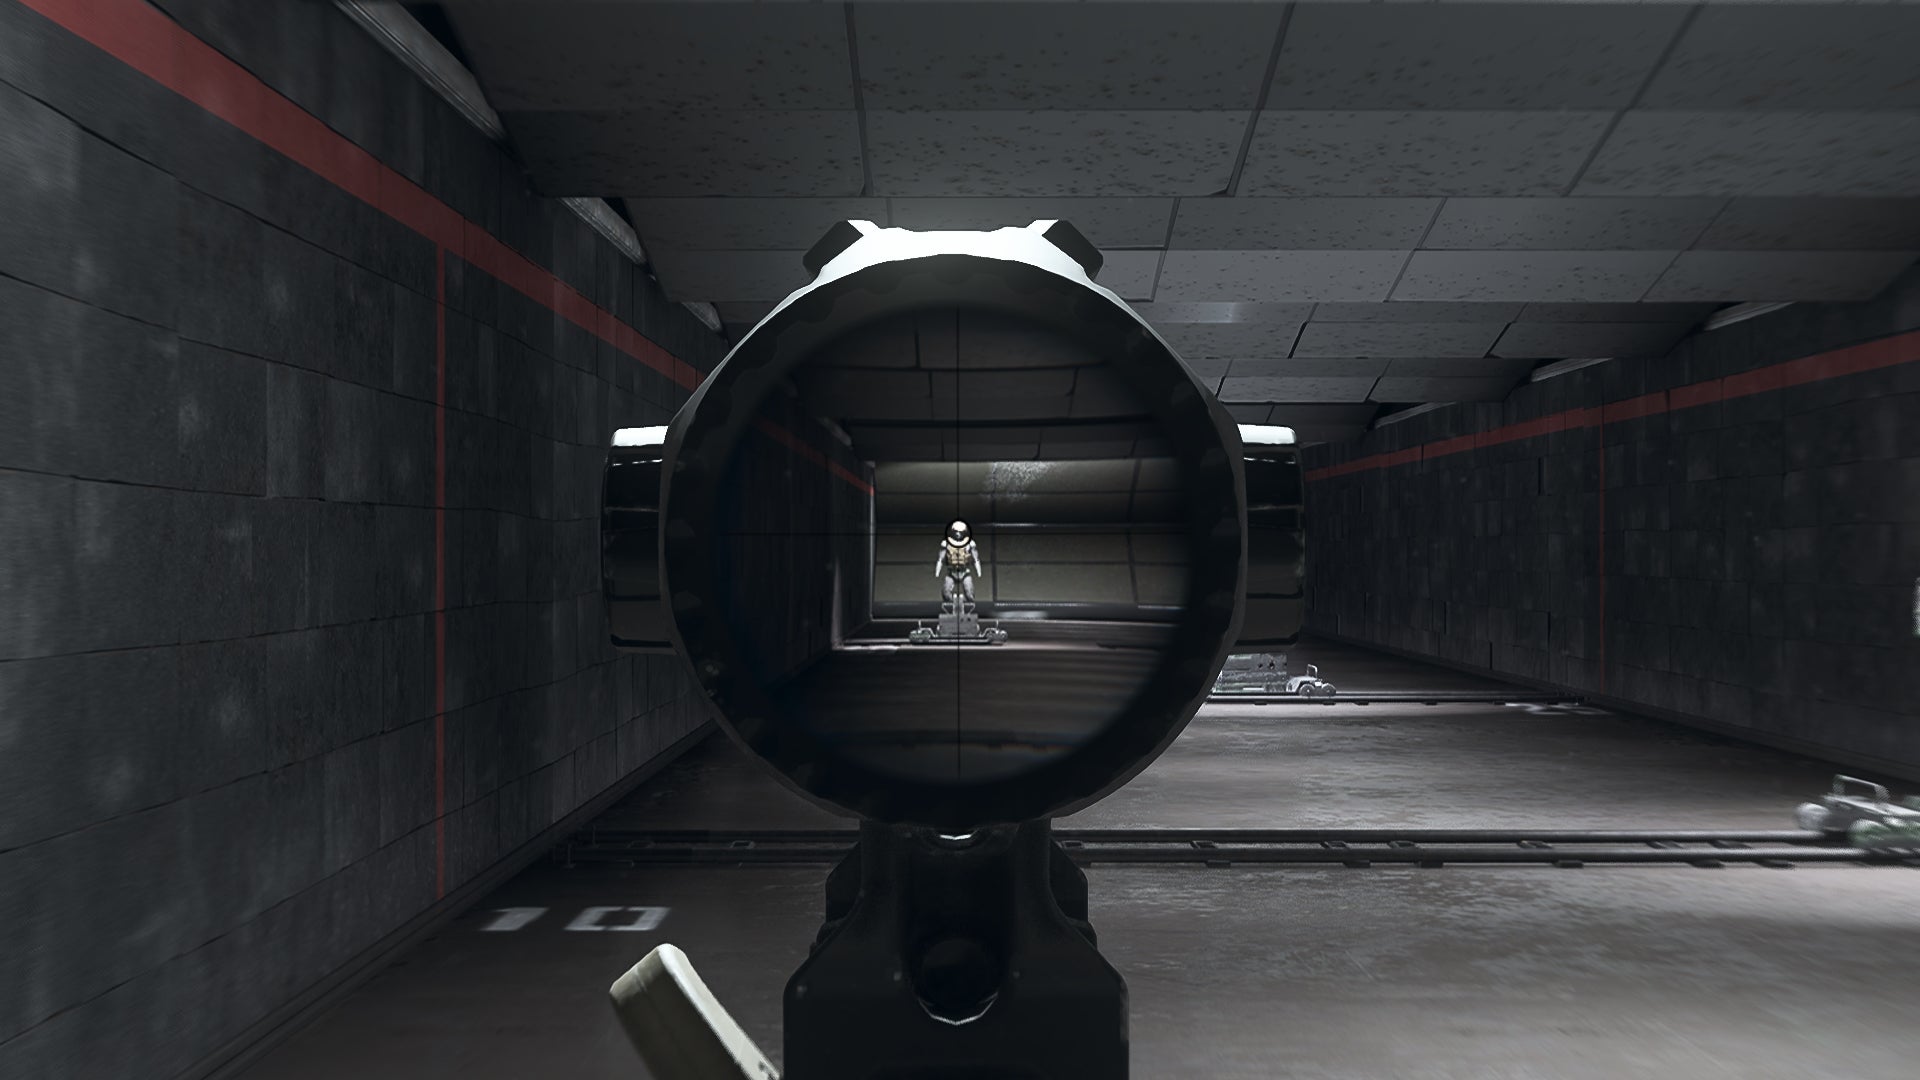 The player in Warzone 2.0 aims at a training dummy using the Luca Canis 4x Optic optic attachment.